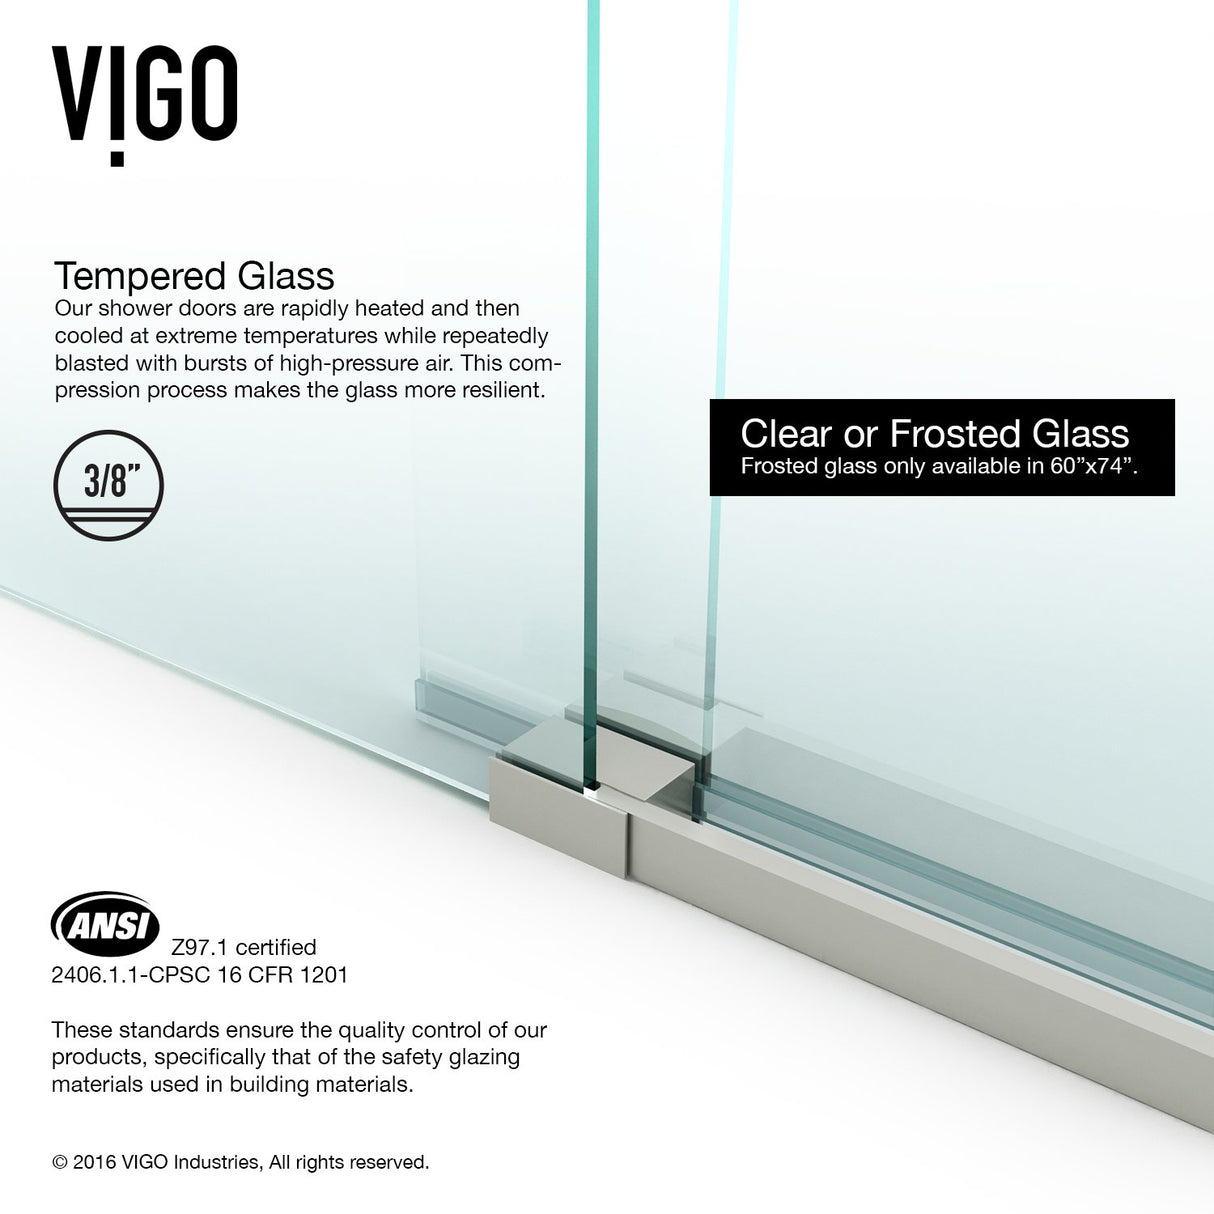 VIGO Adjustable 56 - 60 in. W x 66 in. H Frameless Sliding Rectangle Tub Door with Clear Tempered Glass and Stainless Steel Hardware in Stainless Steel Finish with Reversible Handle - VG6041STCL6066